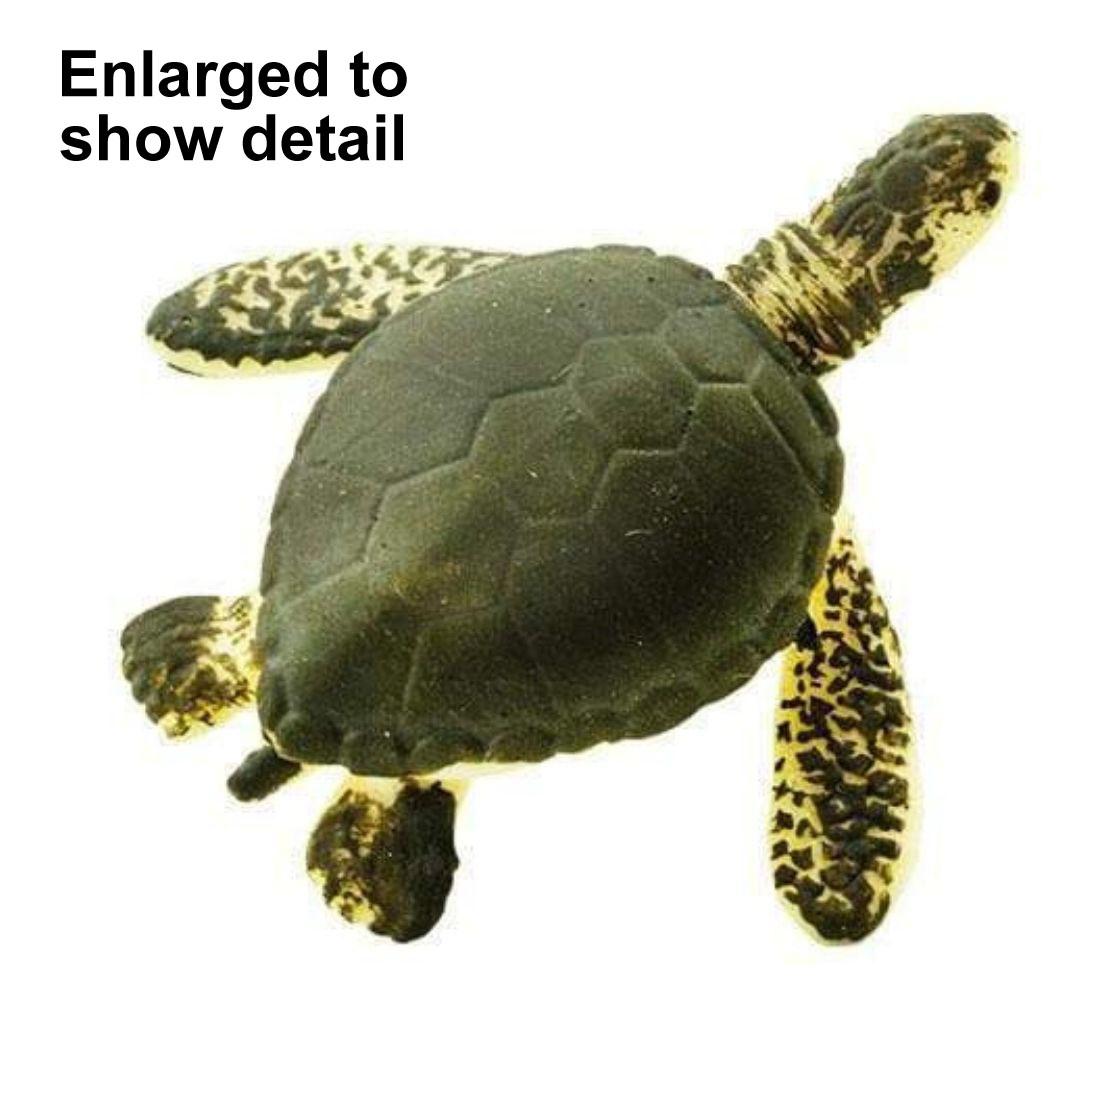 Sea Turtle Mini Figurine with the text Enlarged to Show Detail